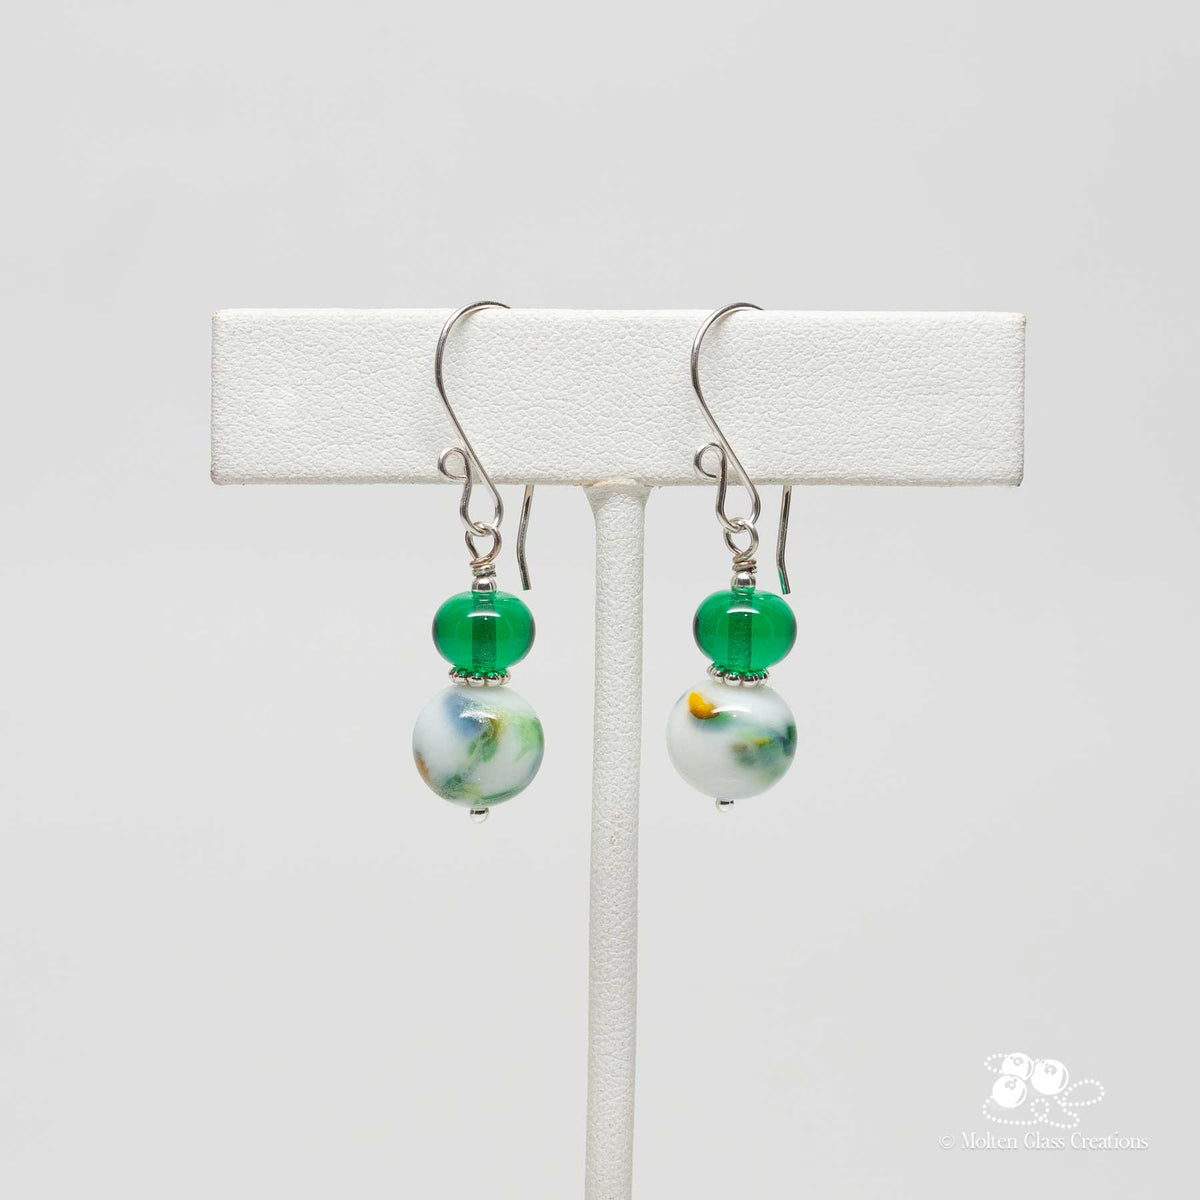 earrings with a green marble style look